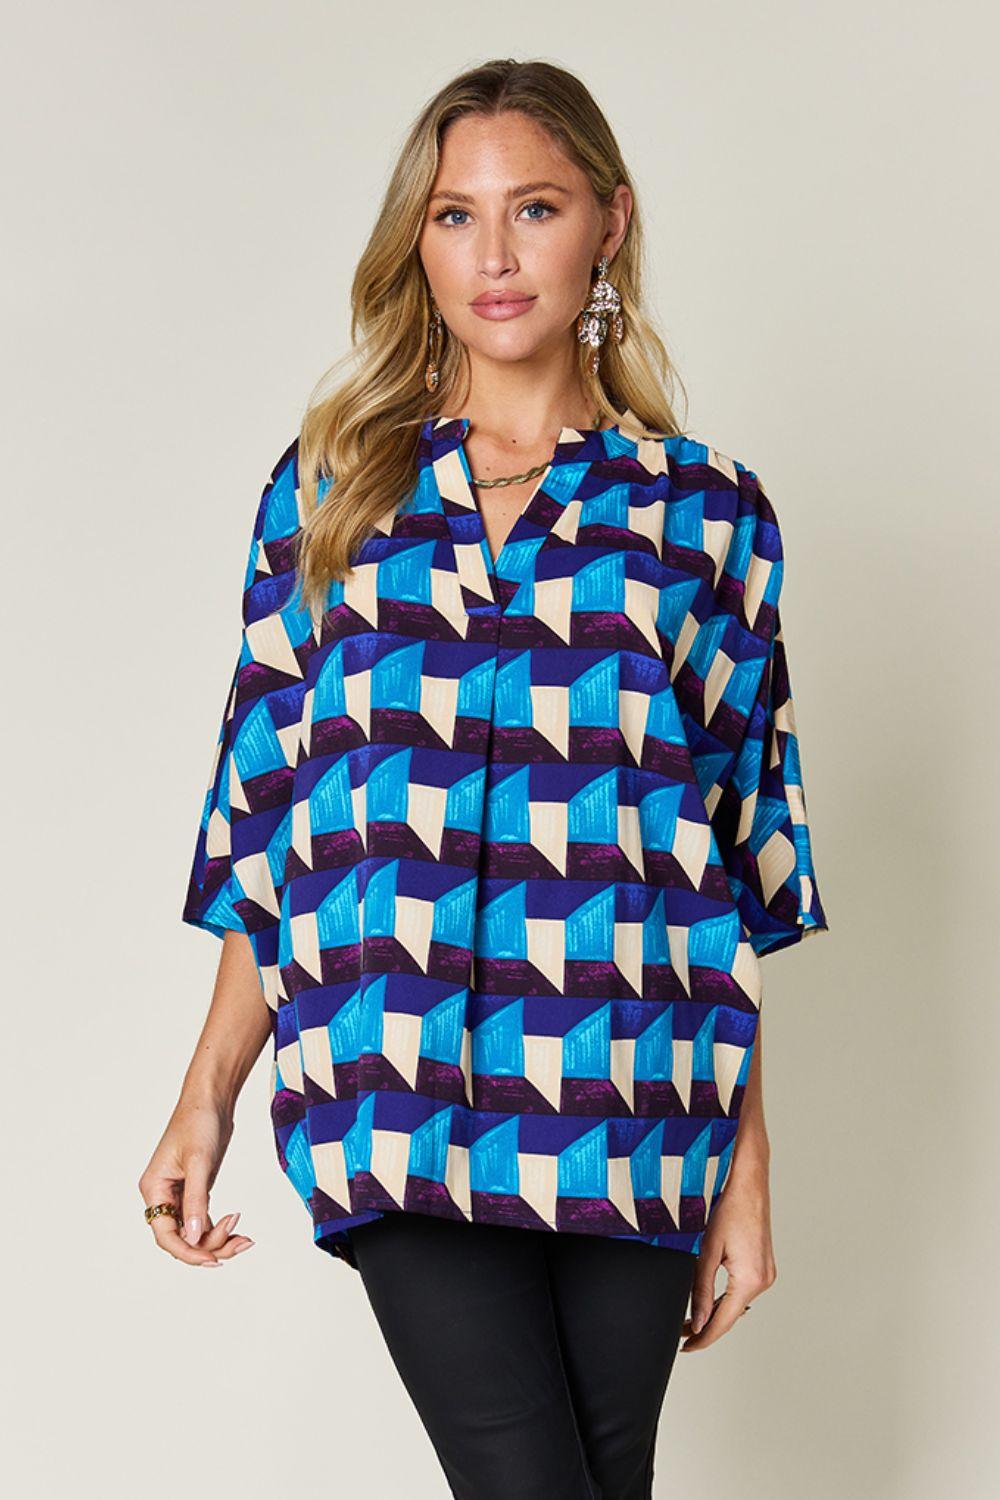 Double Take Full Size Geometric Notched Half Sleeve Blouse Sky Blue Shirts & Tops